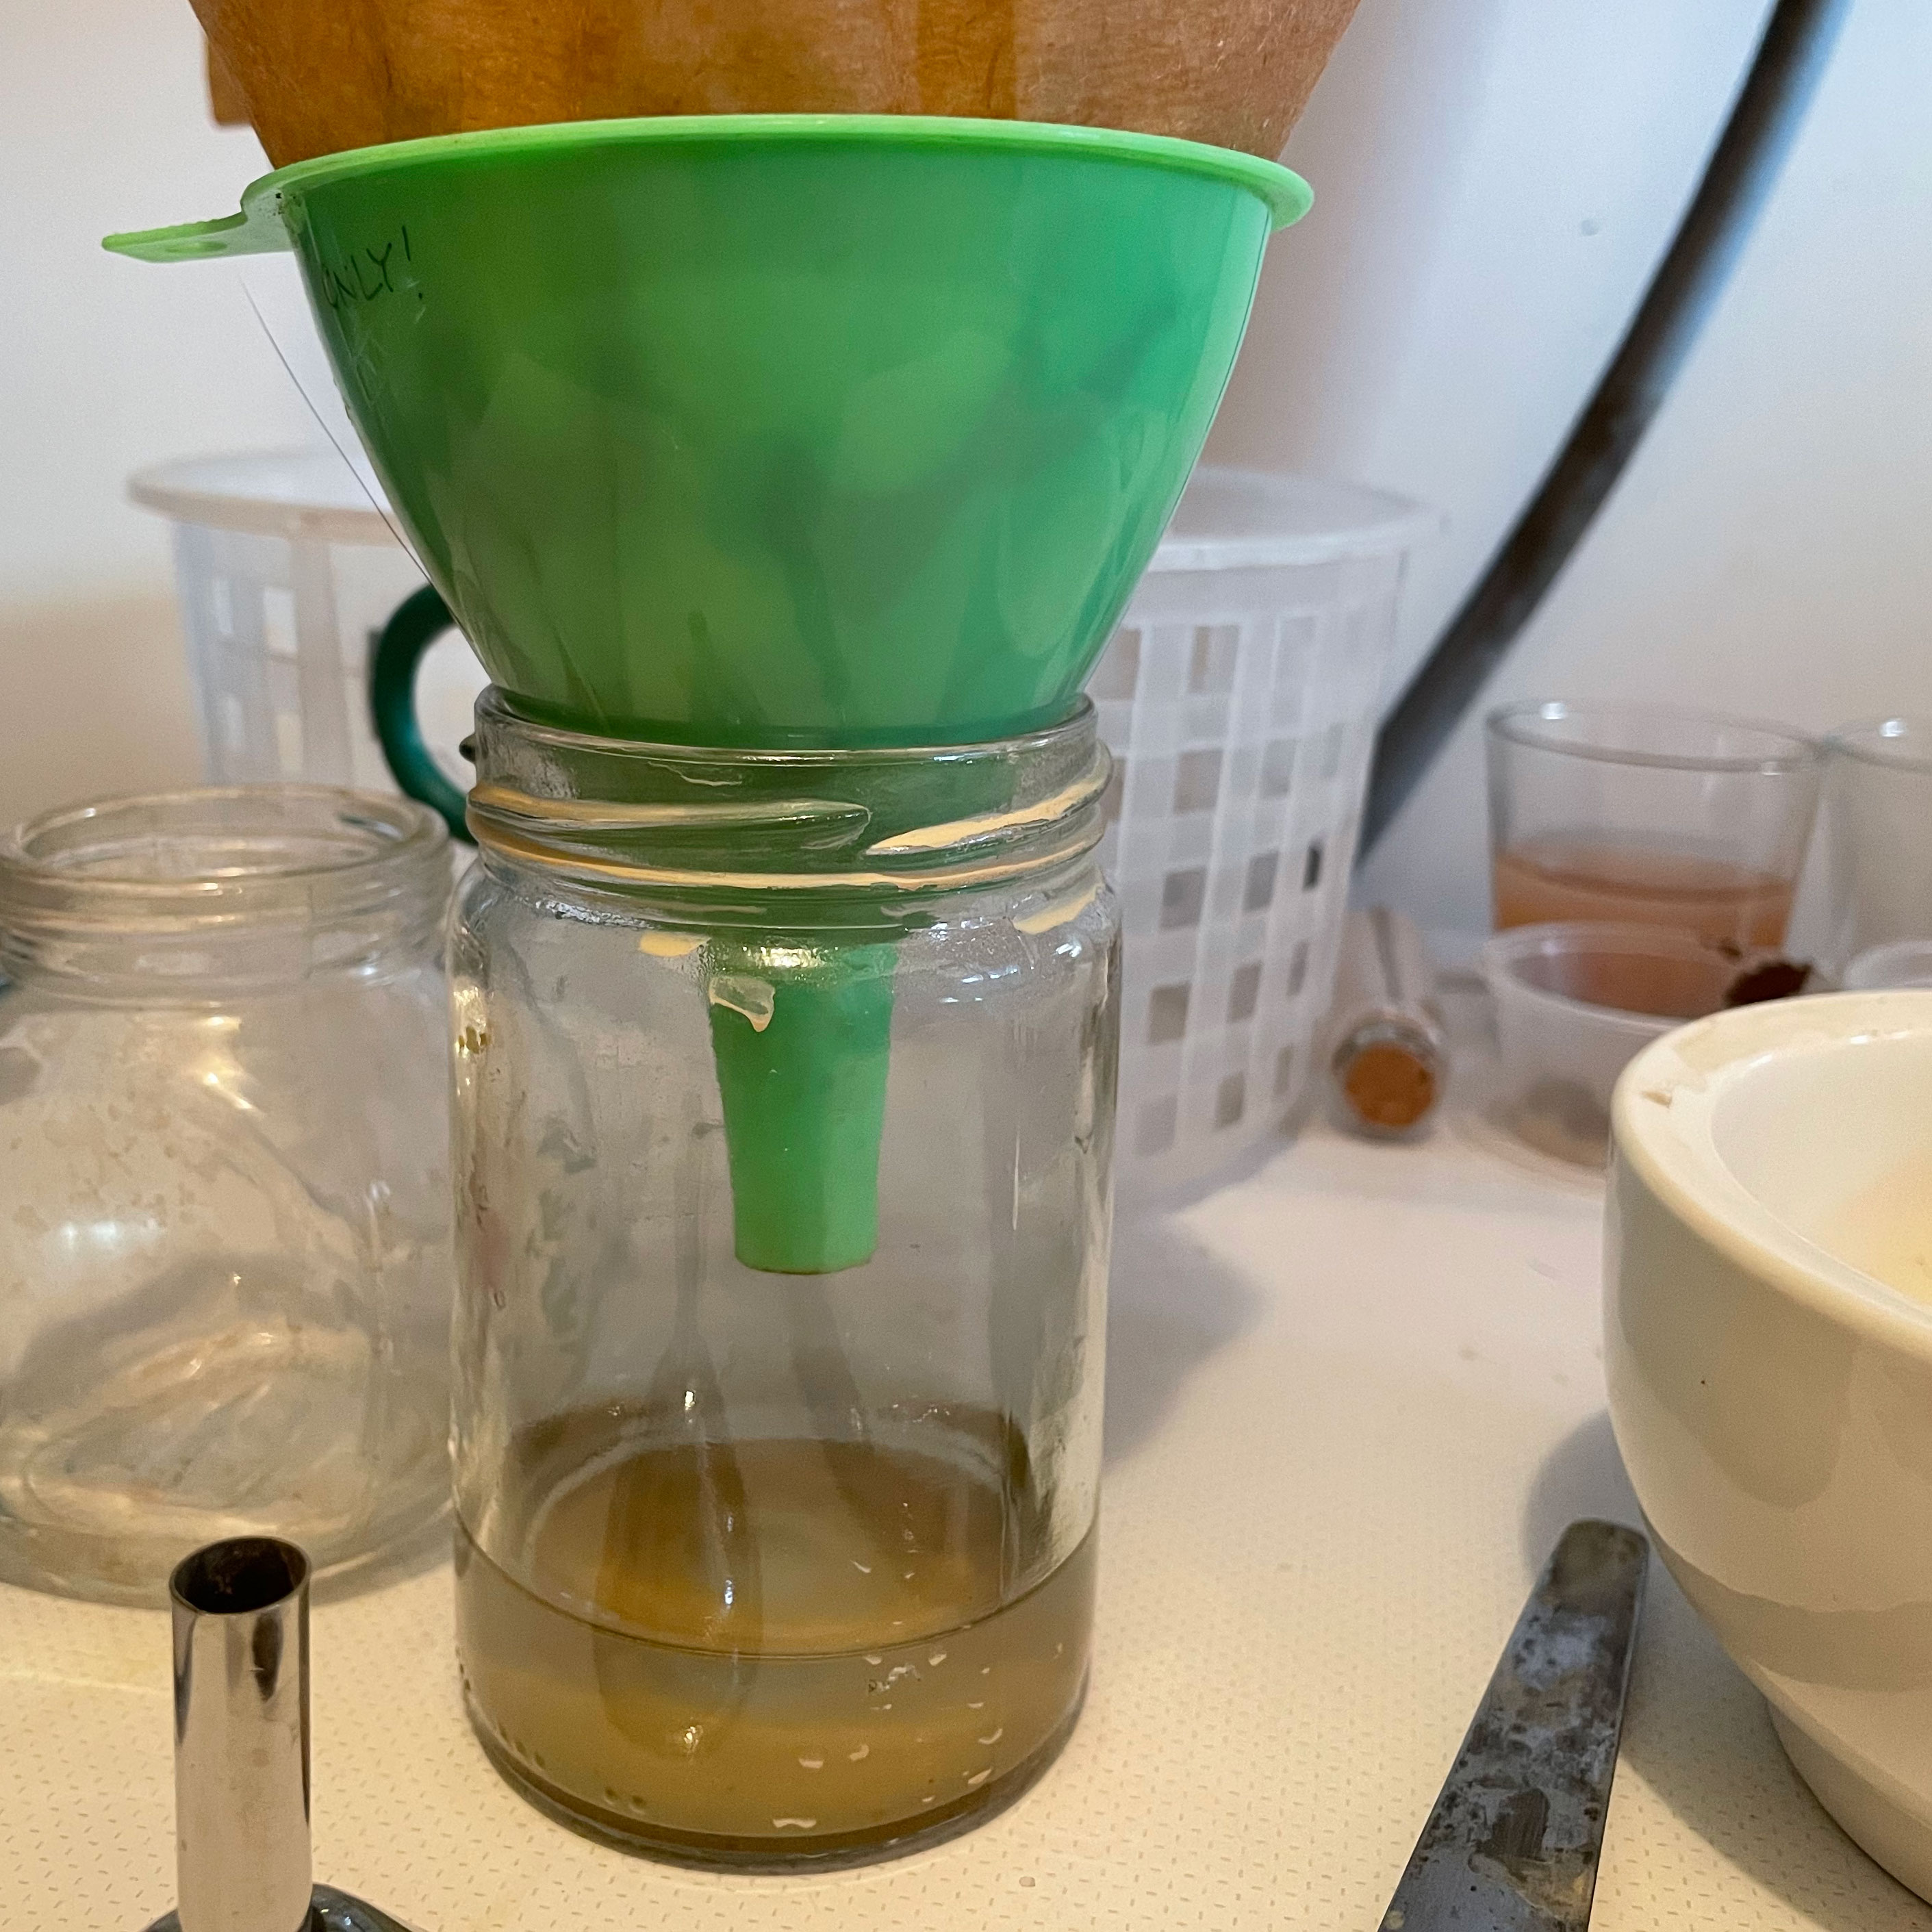 Filtering pigment through a coffee filter placed into a funnel.